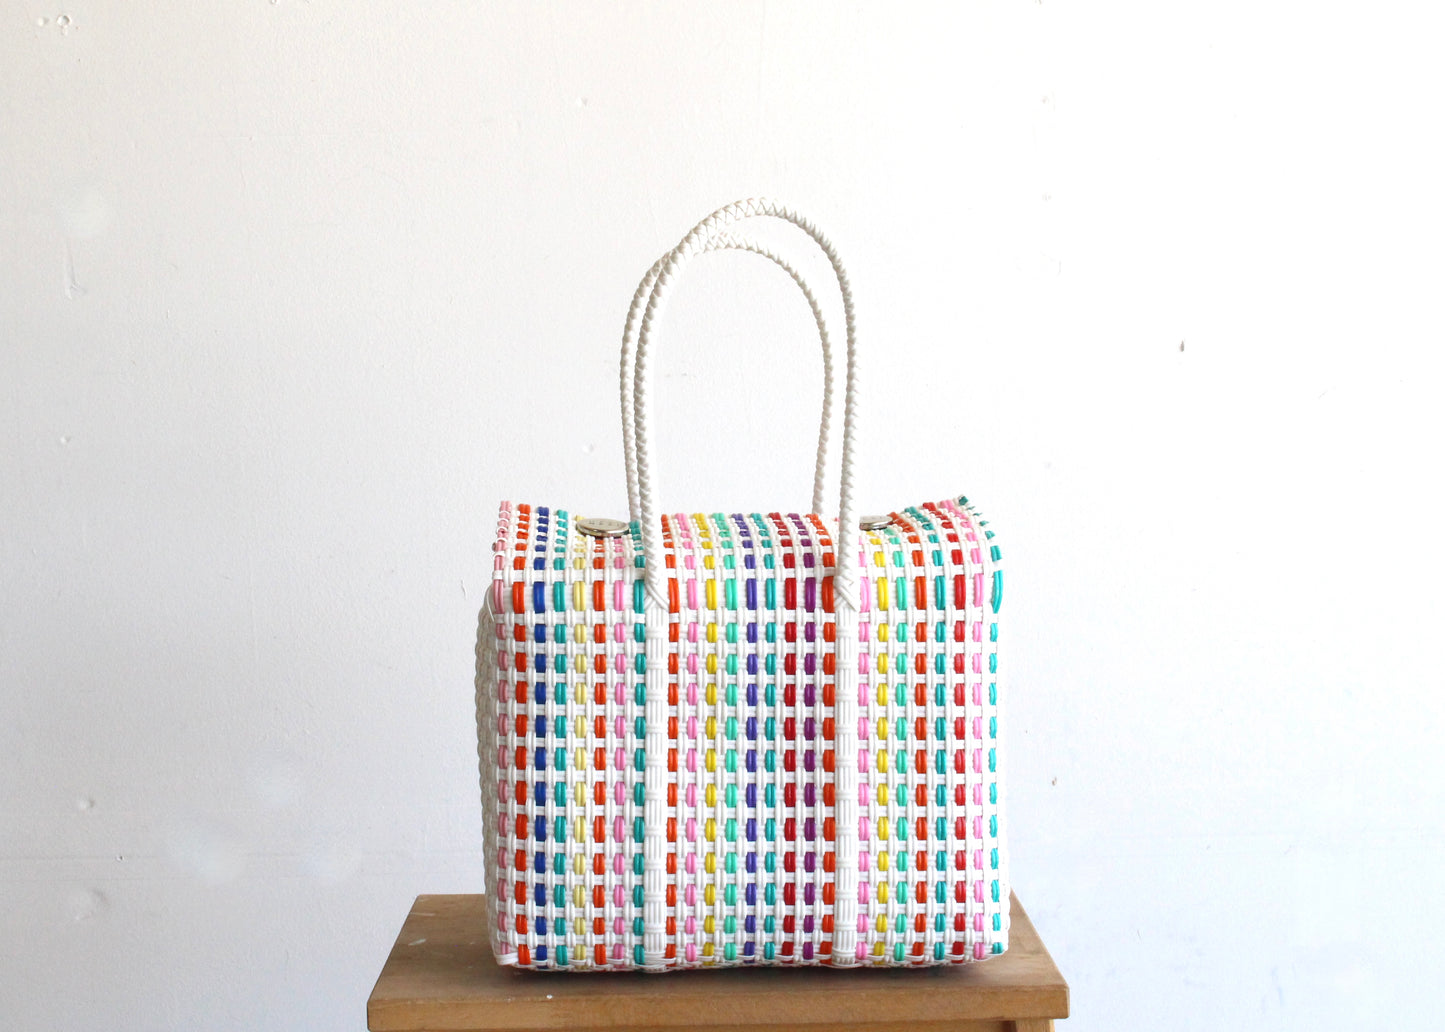 White & All the colors Handwoven Handbag by MexiMexi